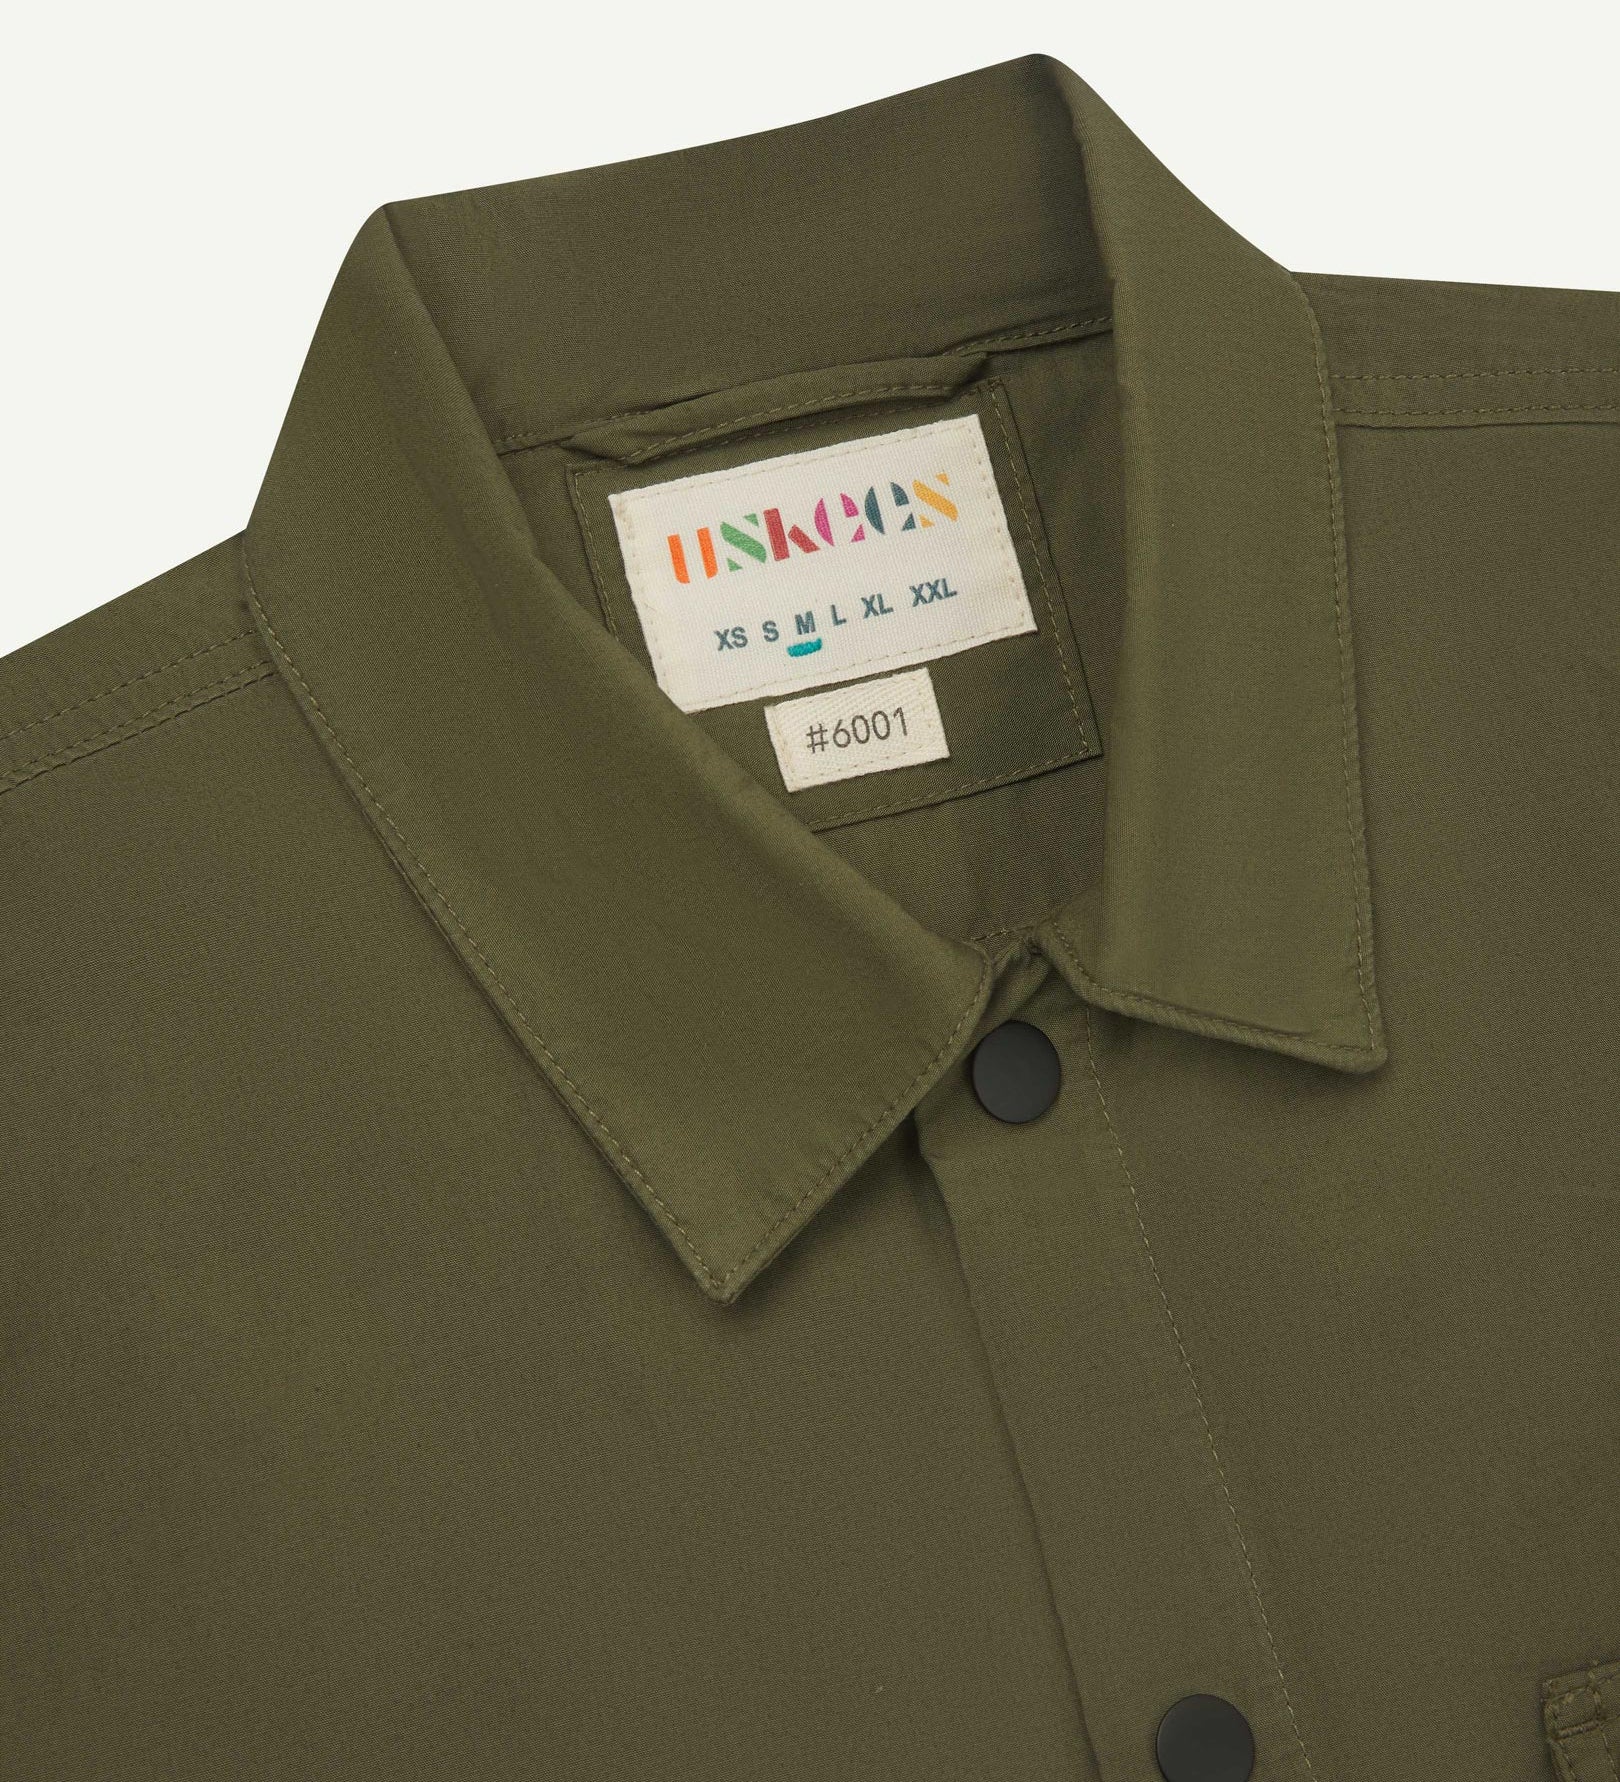 Front close-up view of the collar, popper buttons and Uskees branding label of the olive-green 6001 lightweight overshirt.